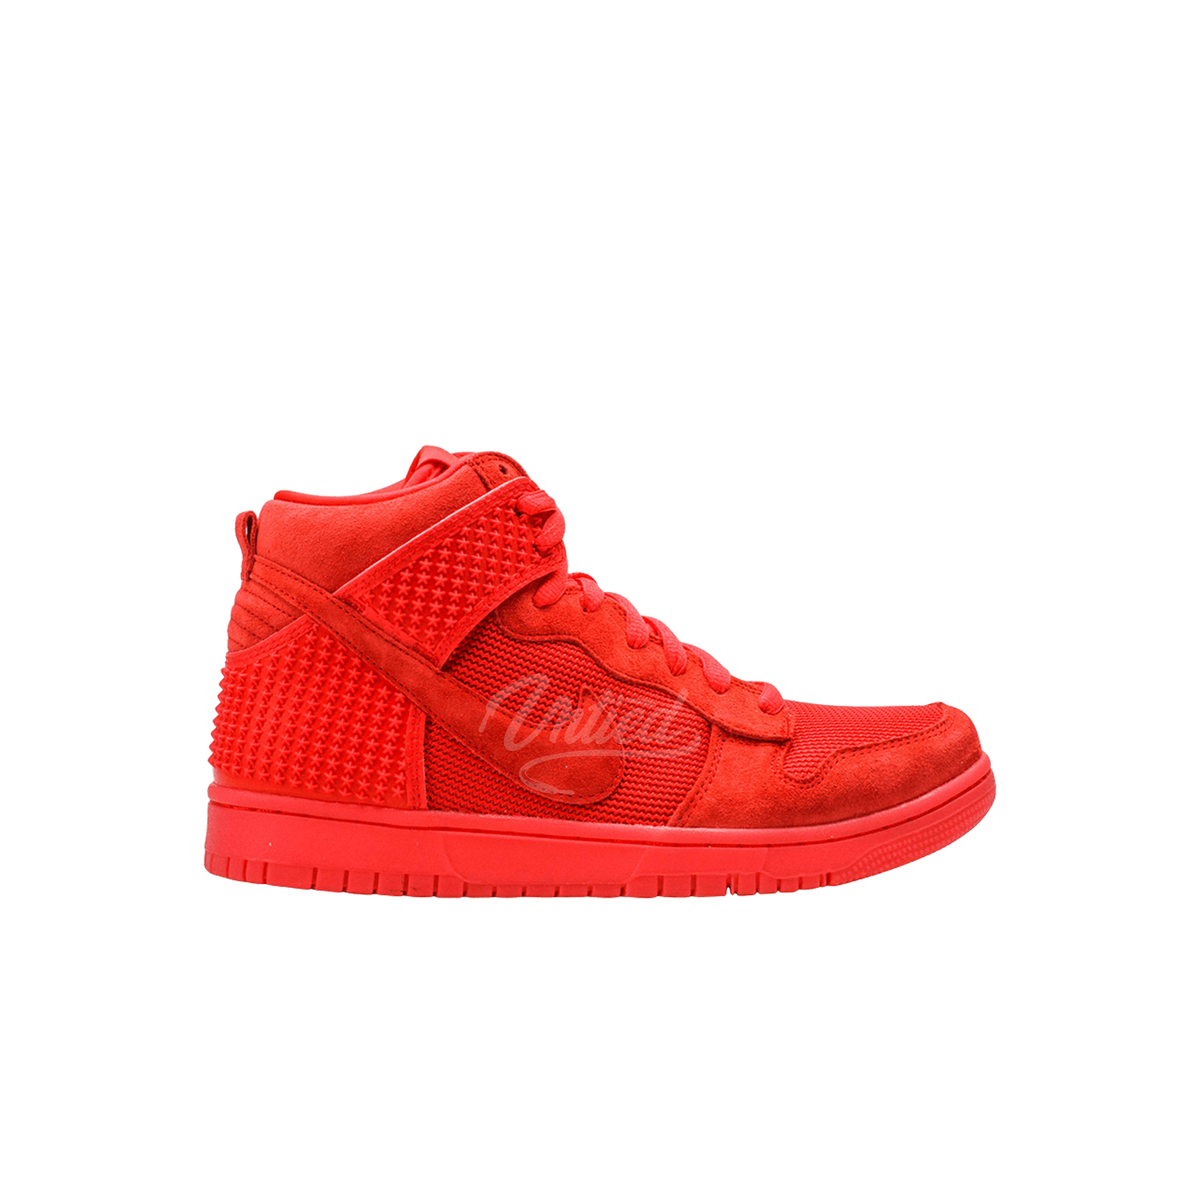 Nike Dunk High "Red October"